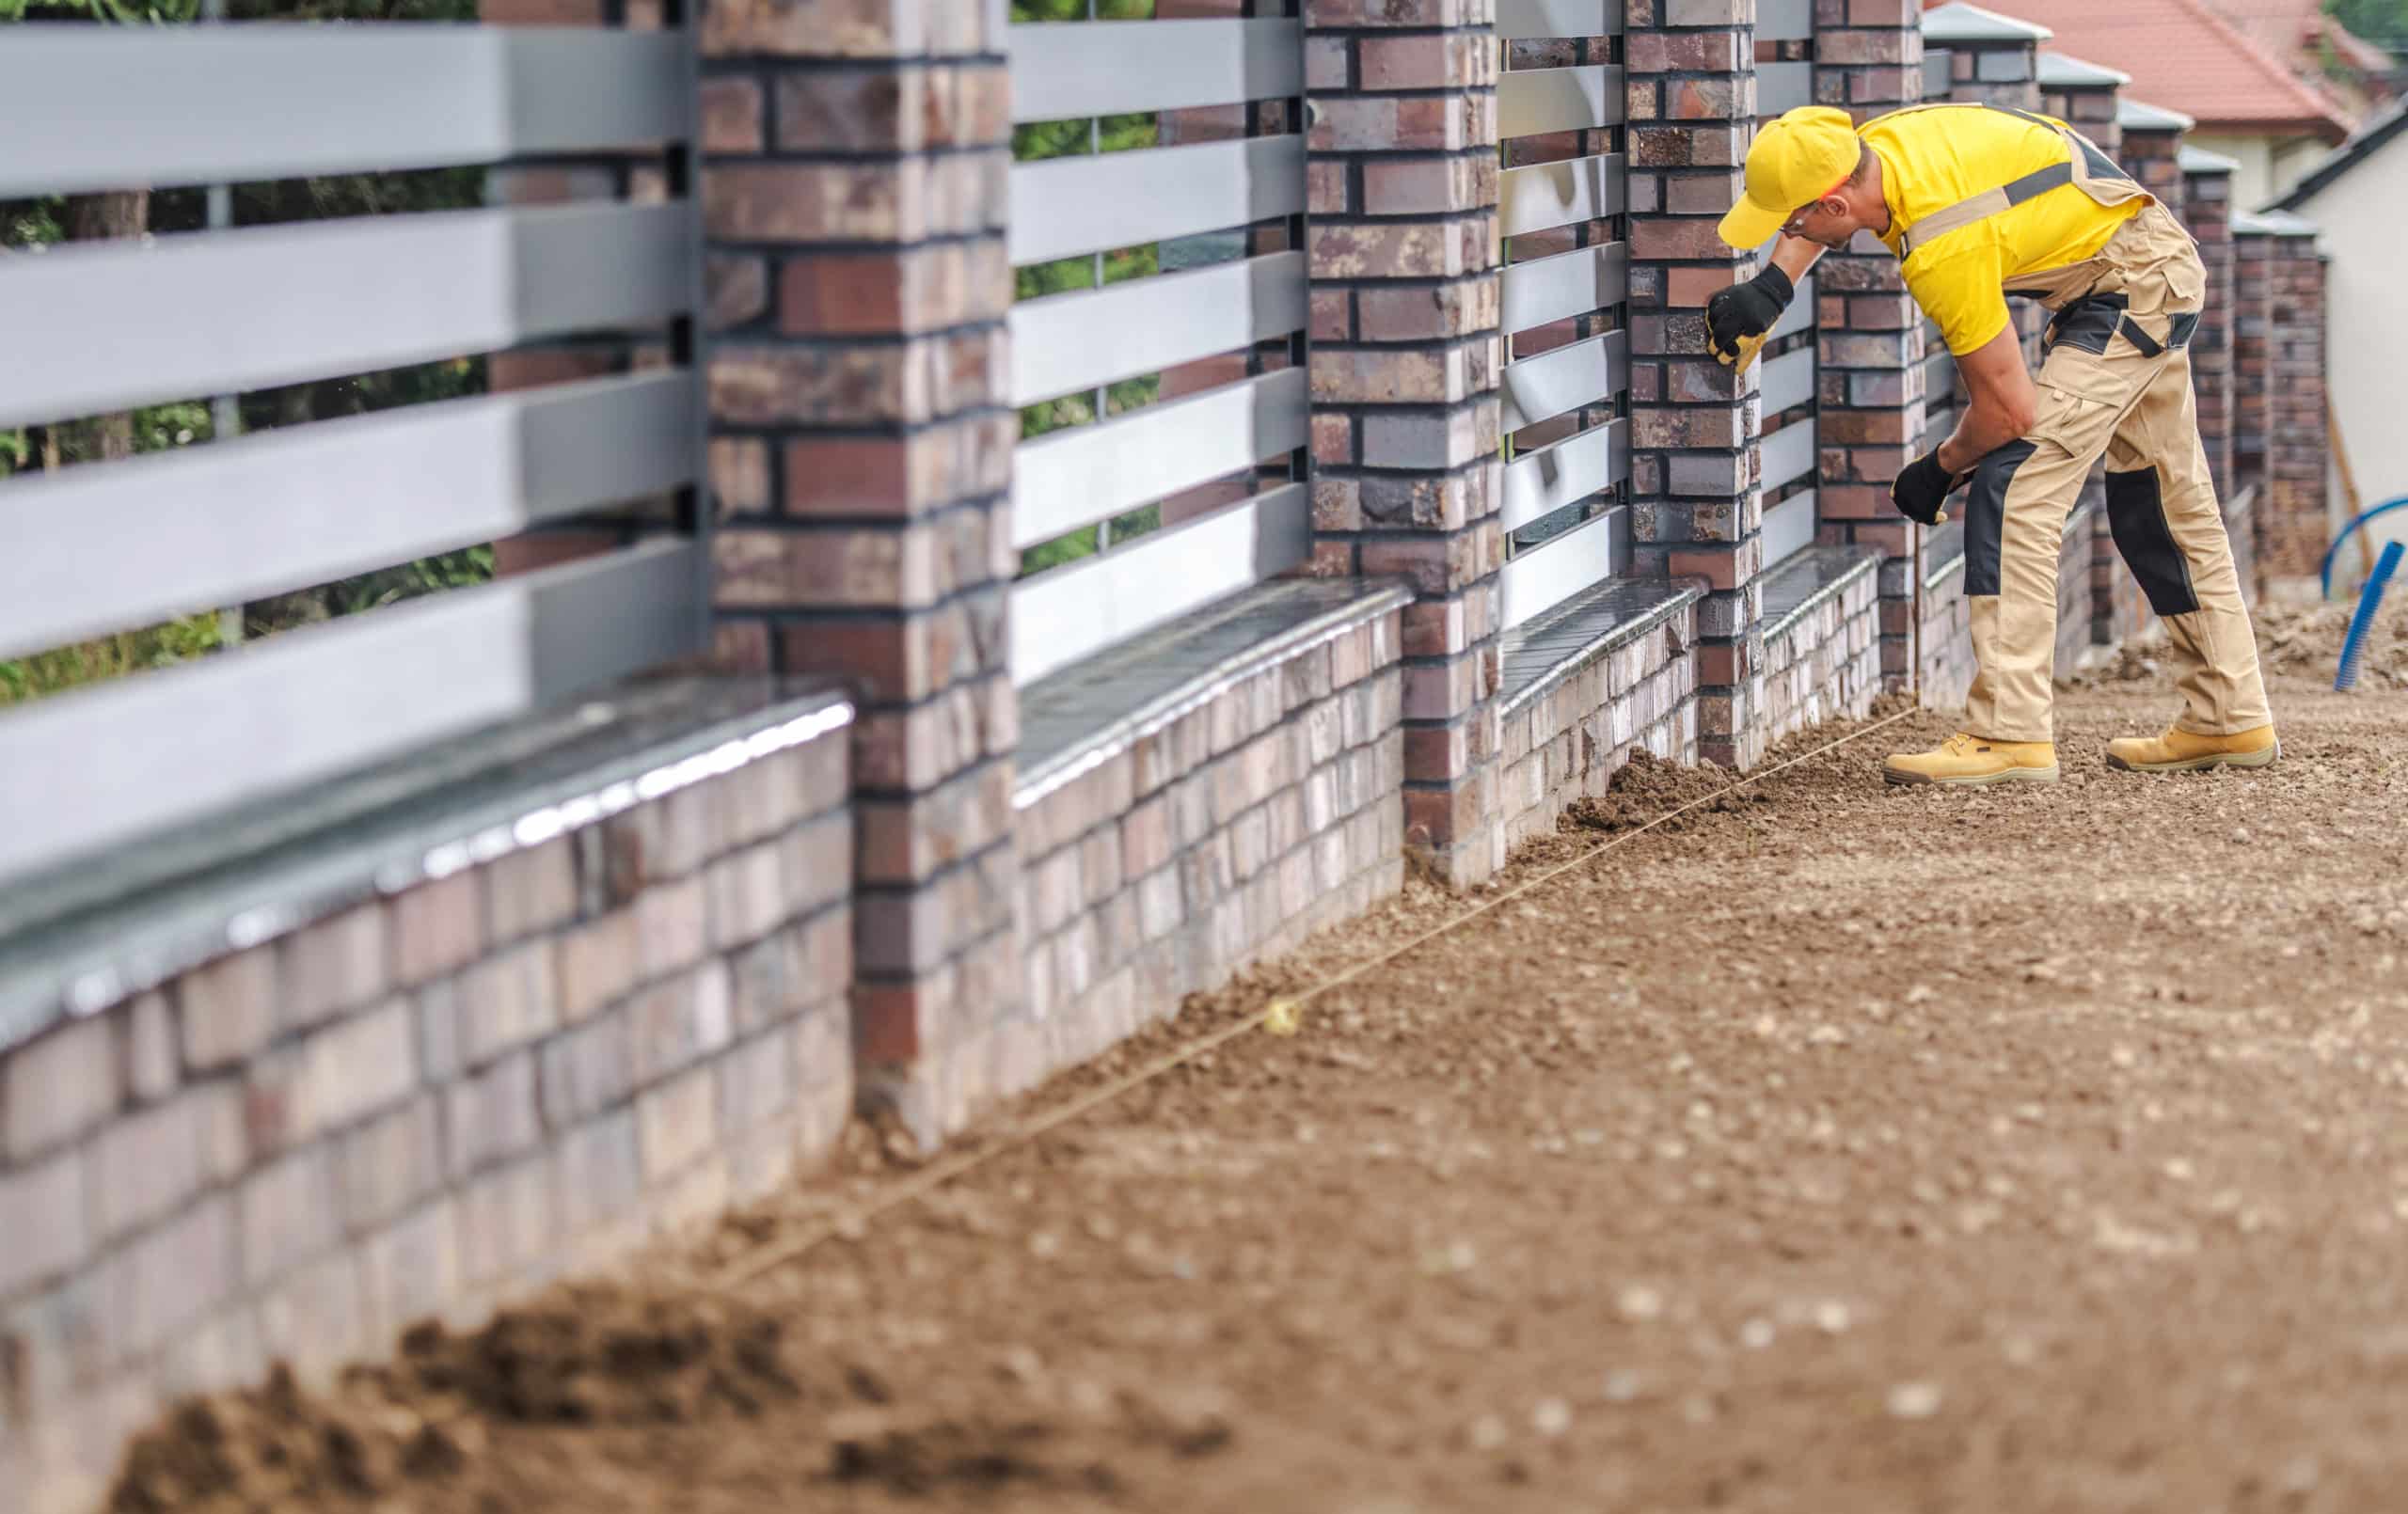 3 Easy Ways To Lower Worker’s Comp Costs For Fencing And Decking Businesses